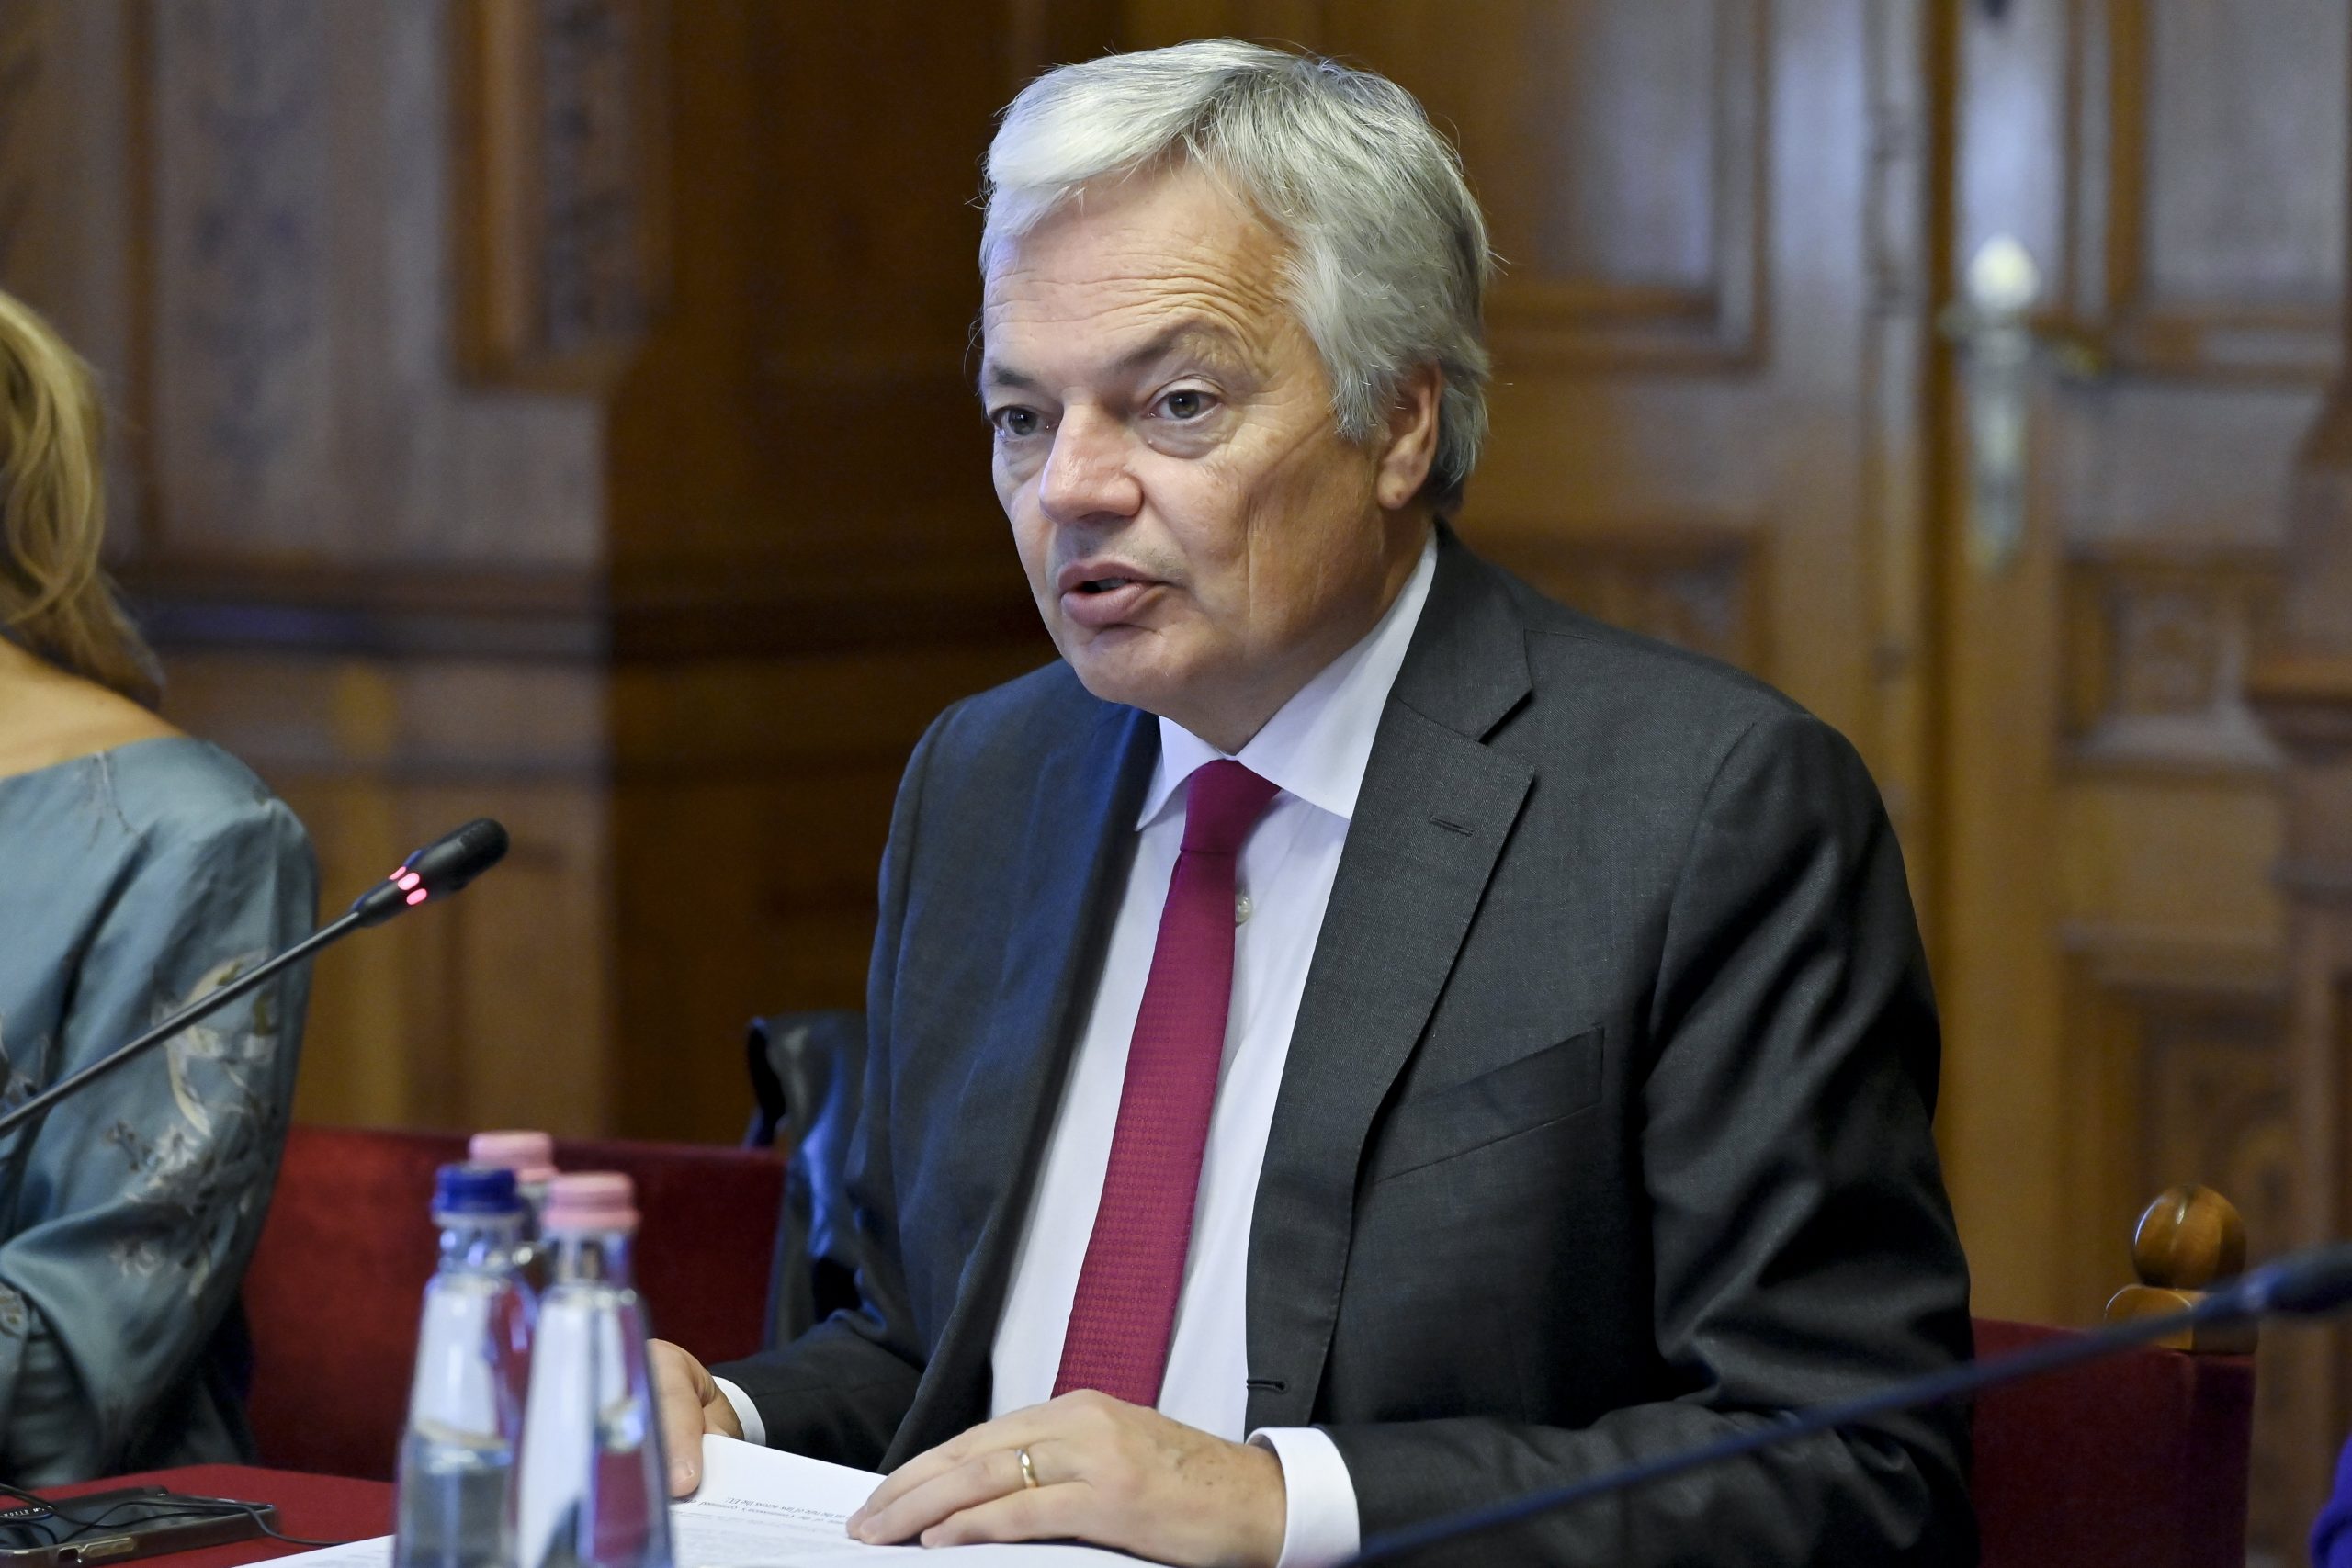 Commissioner Reynders: EU Will Not Sanction Hungary before Elections